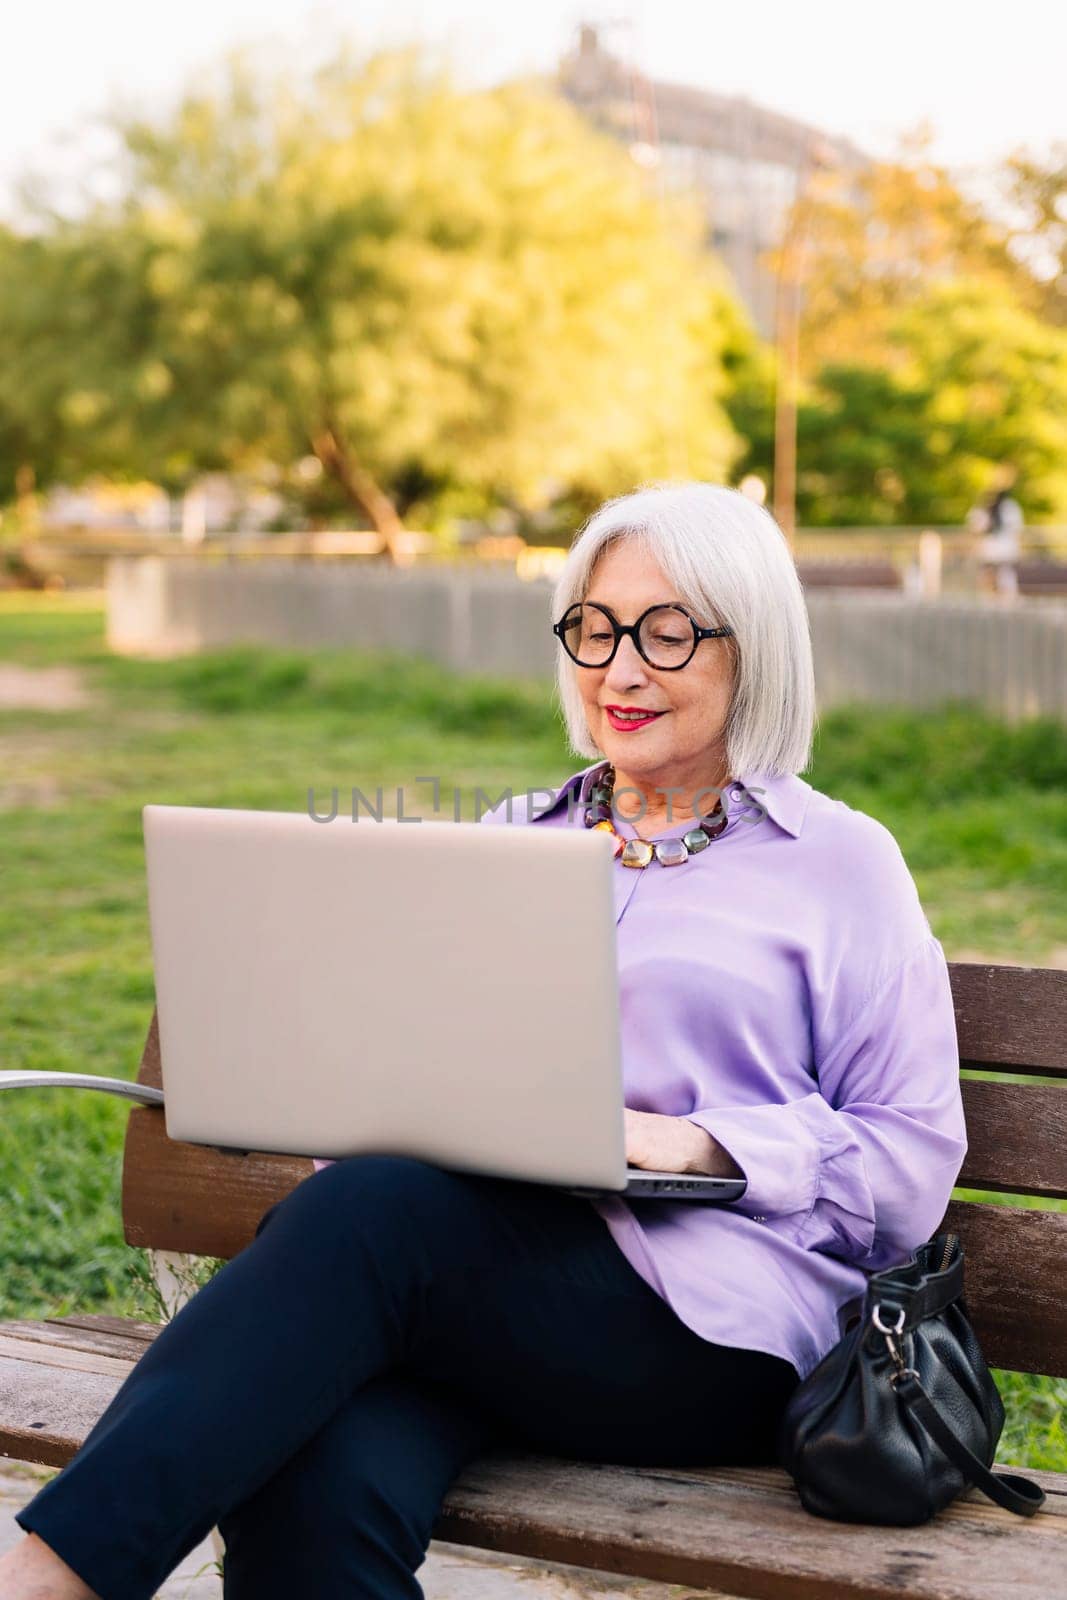 senior woman with glasses using laptop outdoors by raulmelldo